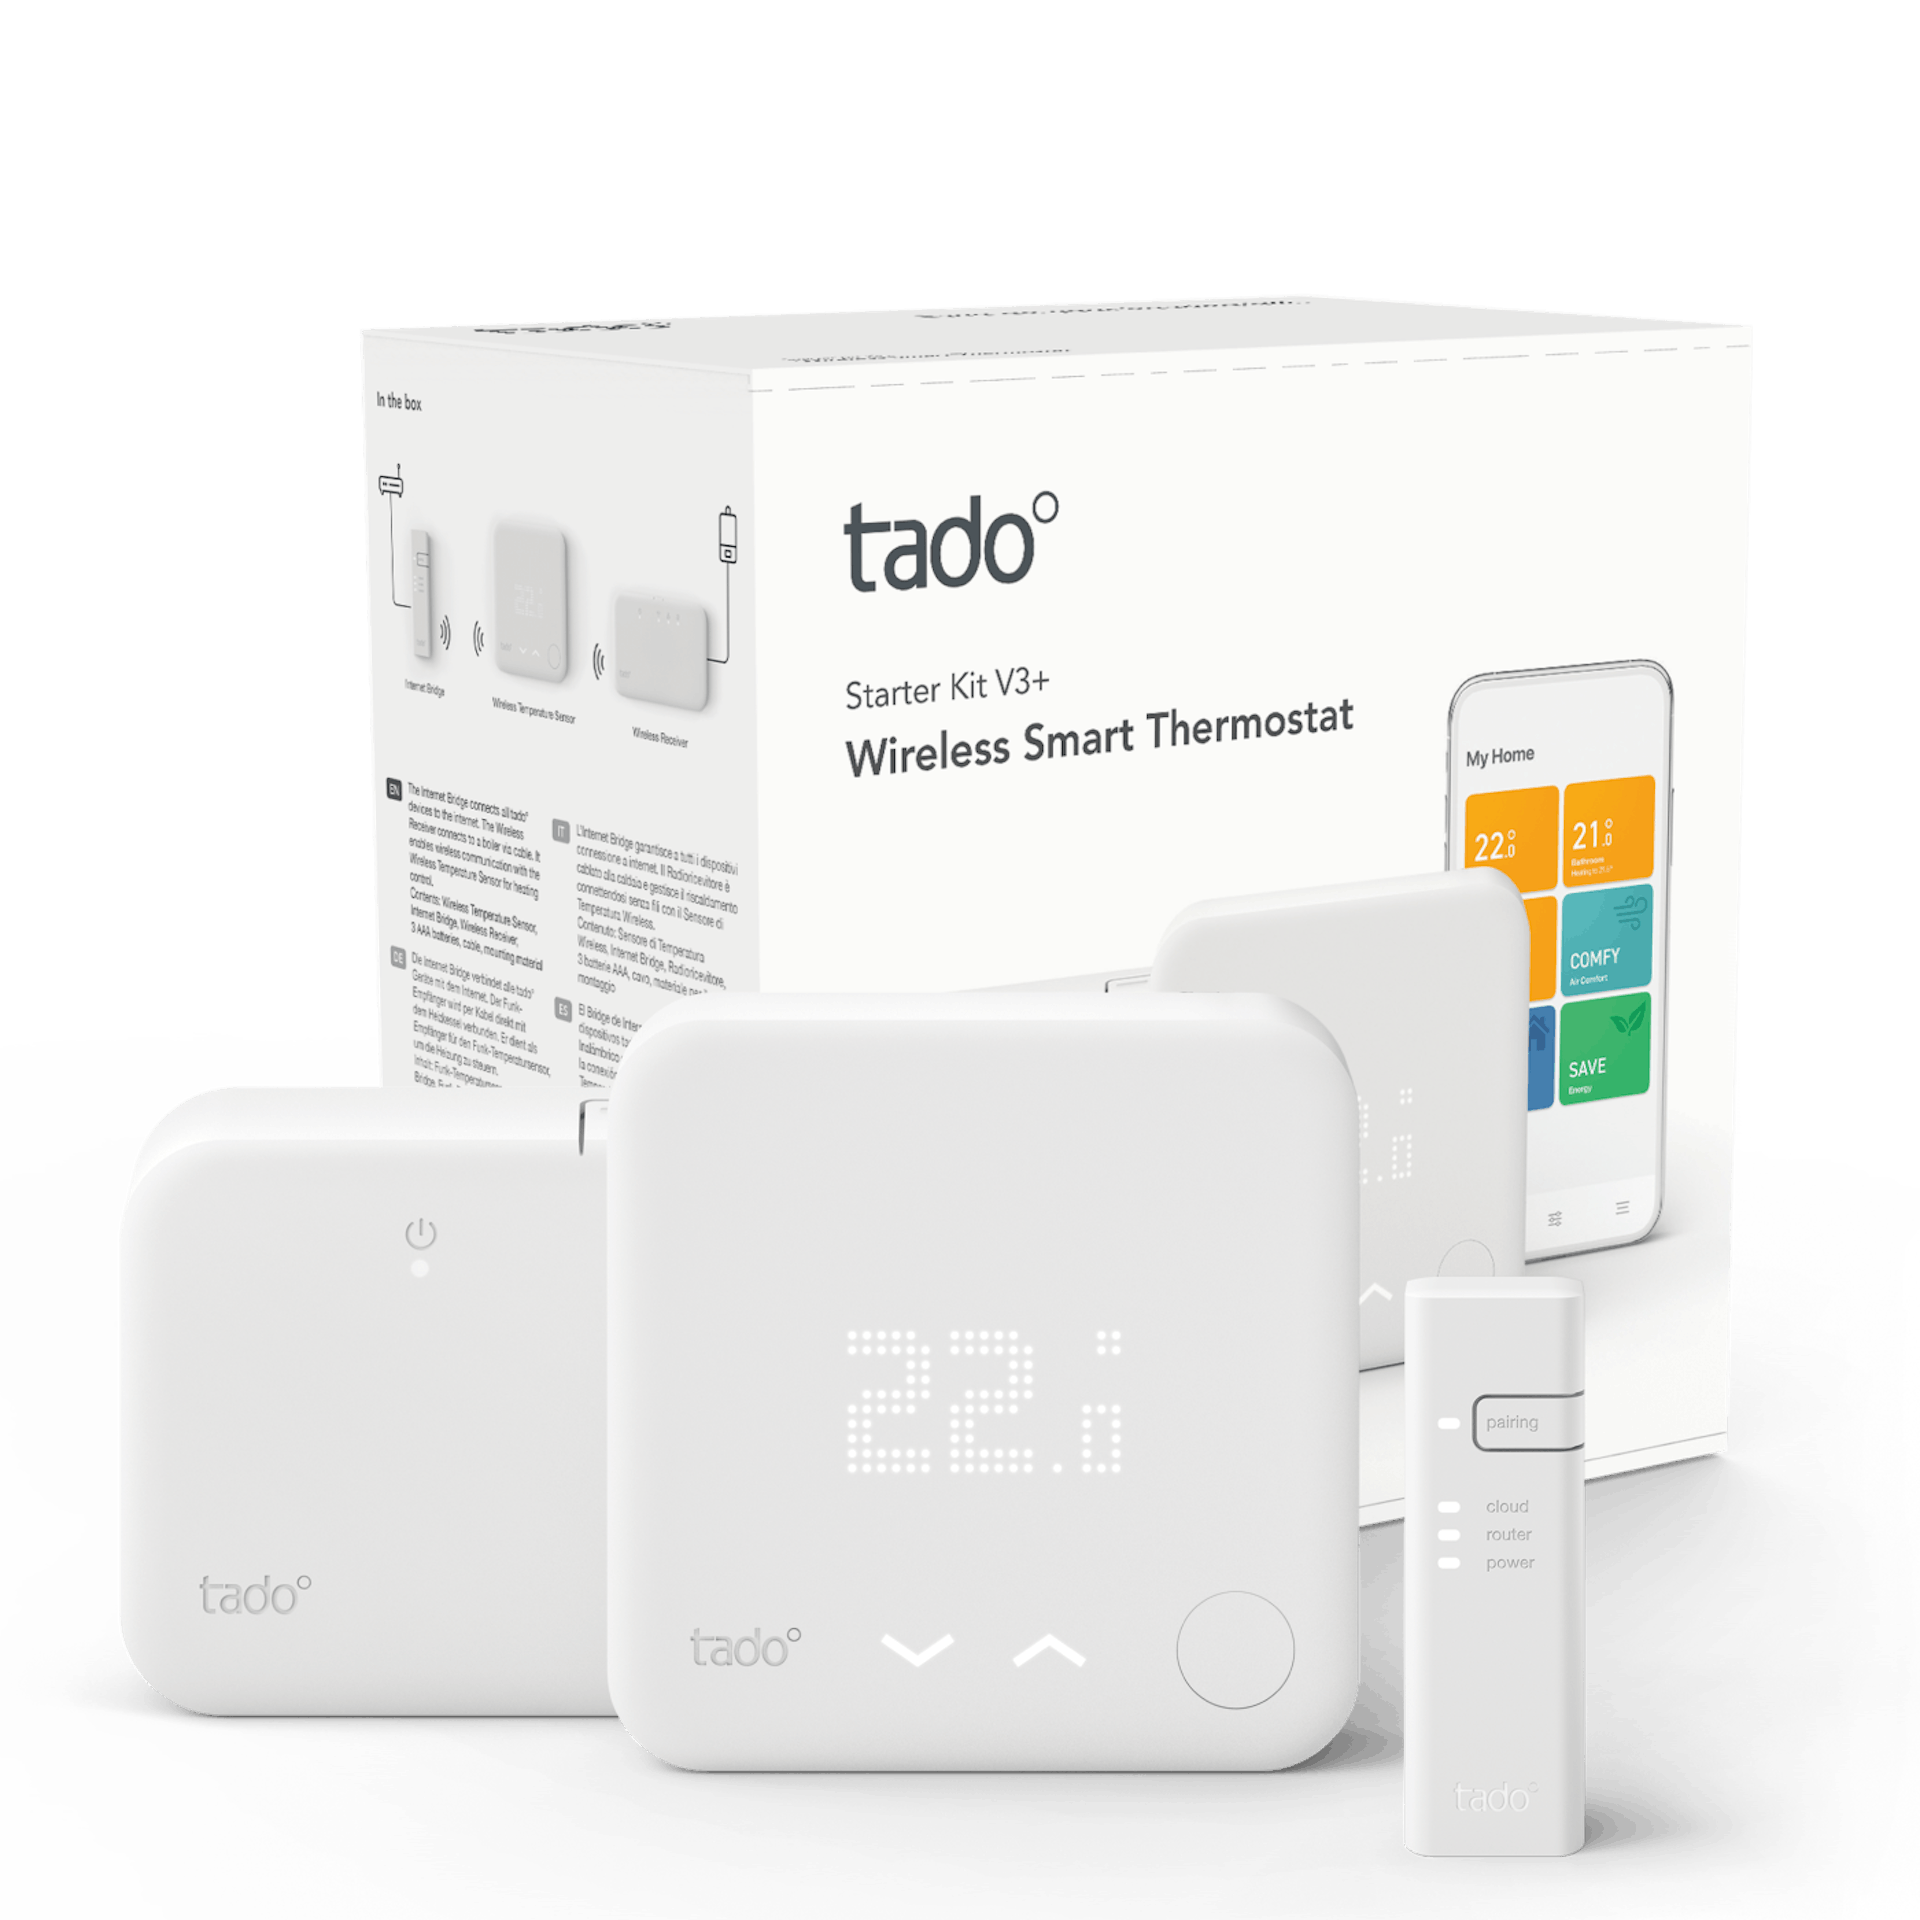 Tado - Wireless Smart Thermostat V3+ - Packaging image